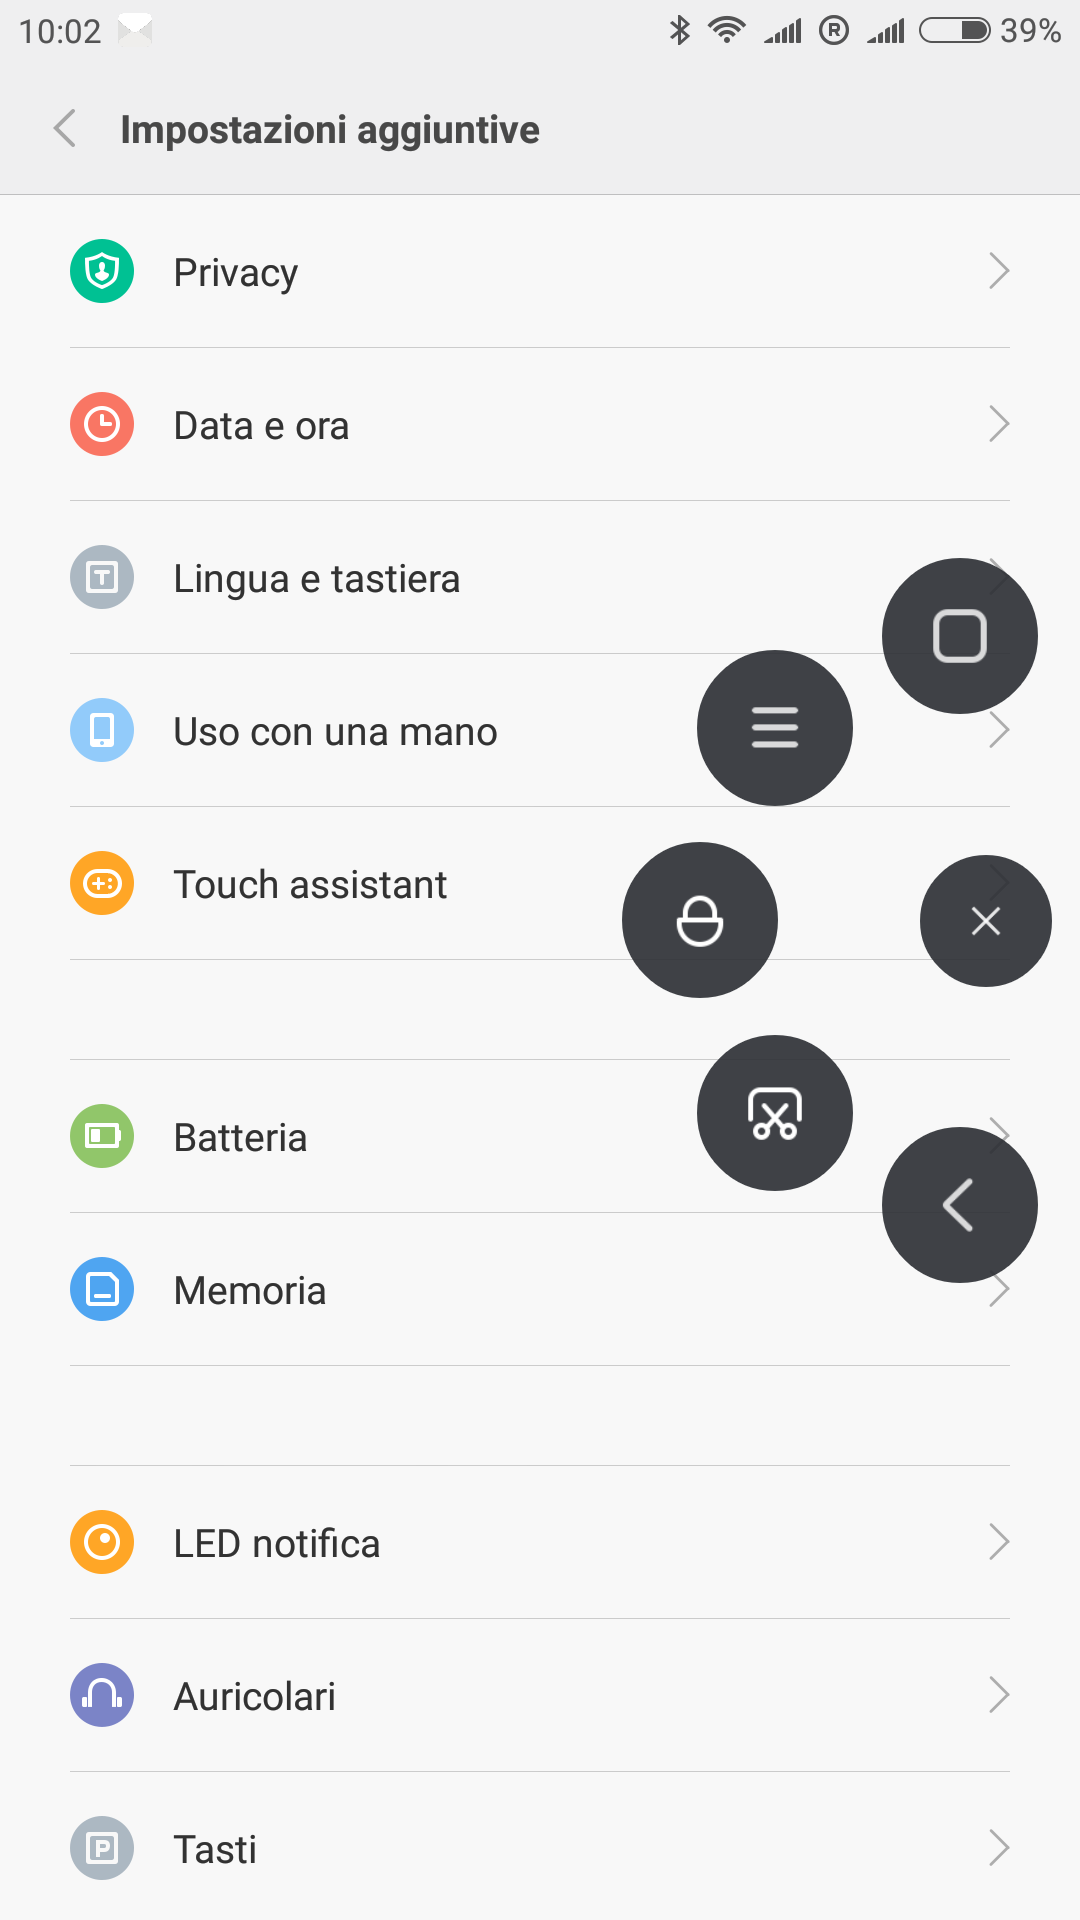 Touch Assistant